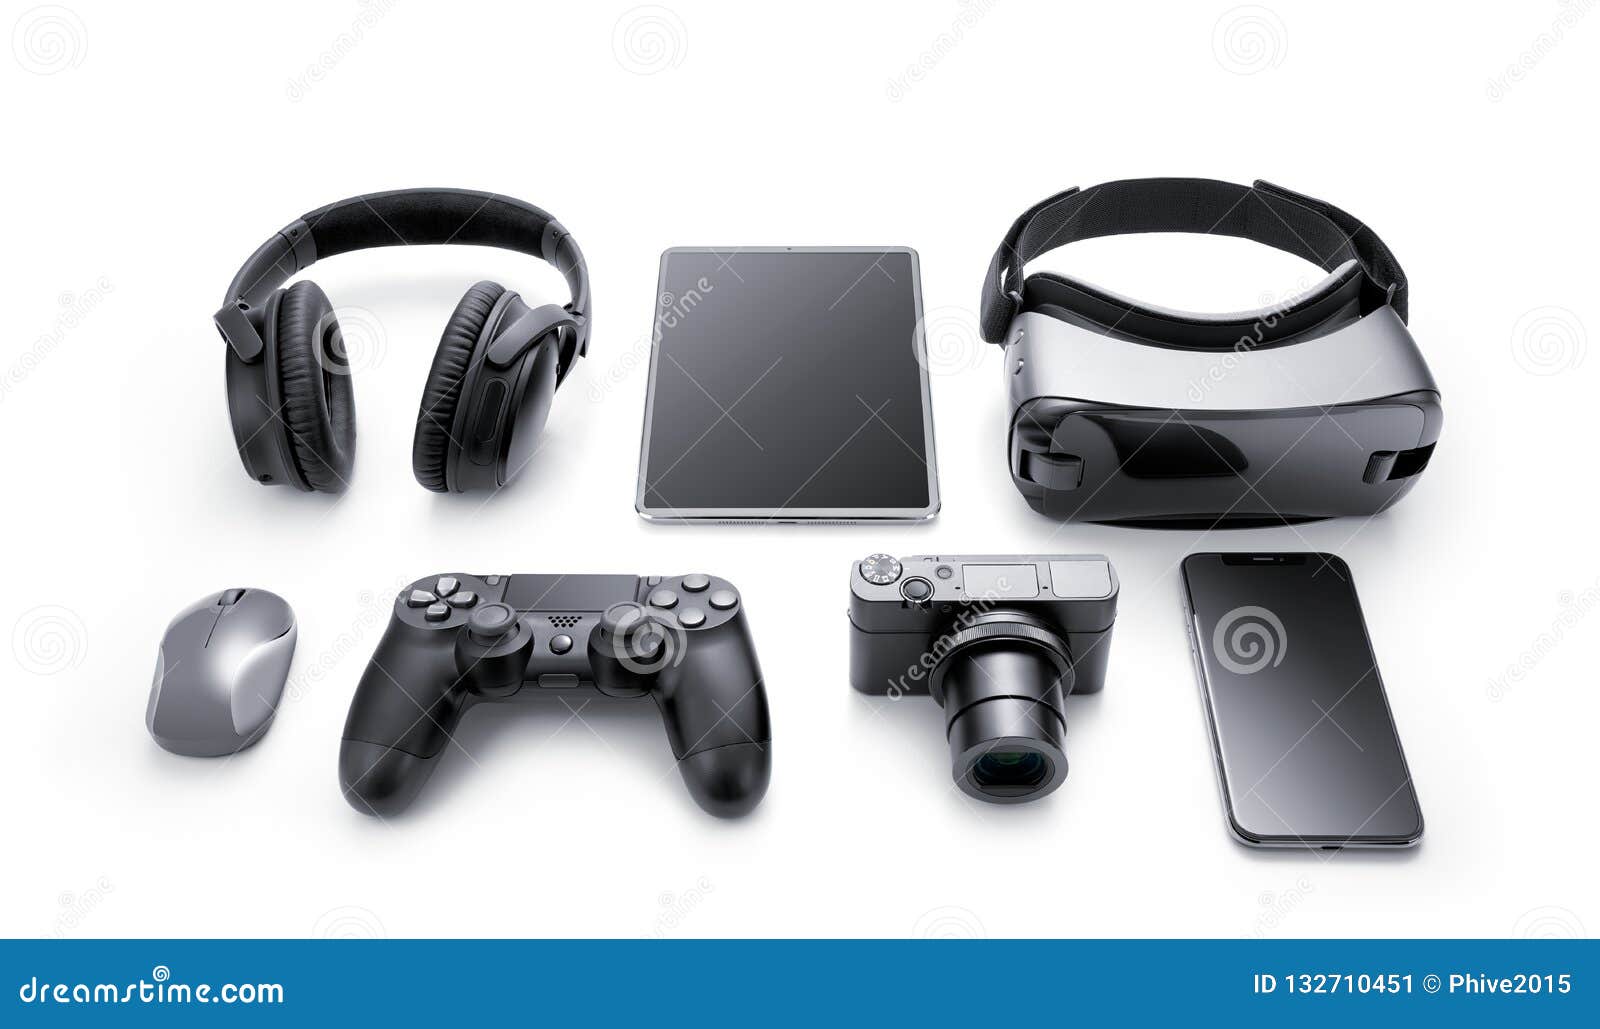 gadgets addiction
gadgets and technology
gadgets accessories
gadgets advantages
gadgets
gadgets meaning
gadgets brand
gadgets business
gadgets brand name
gadgets for gaming